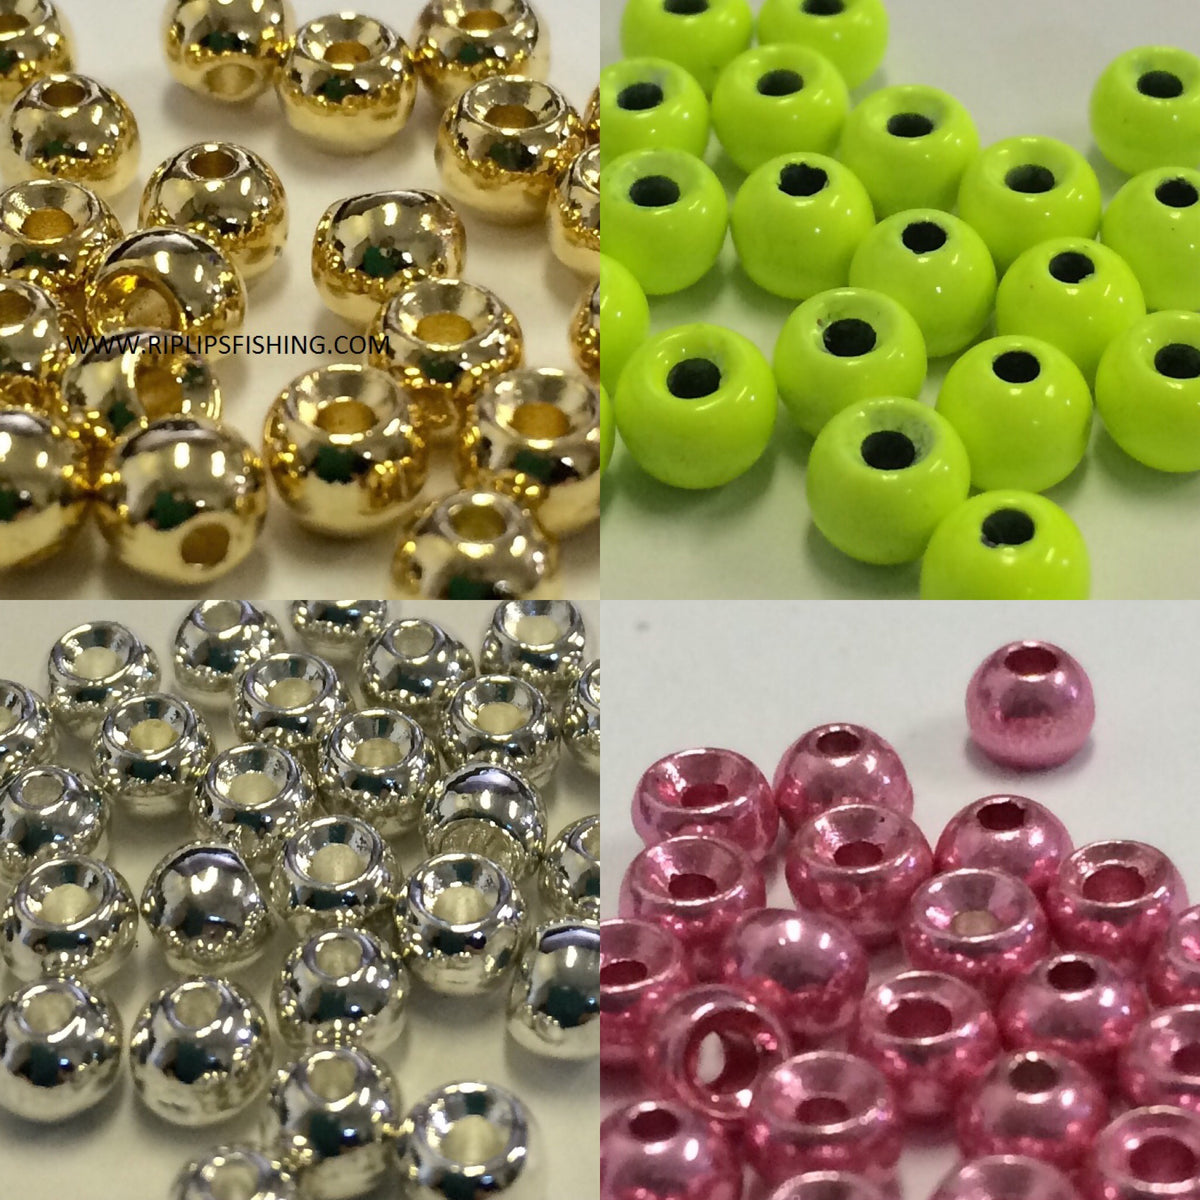 Brass Beads Per 200 Page 2 – Sportsmen's Connection